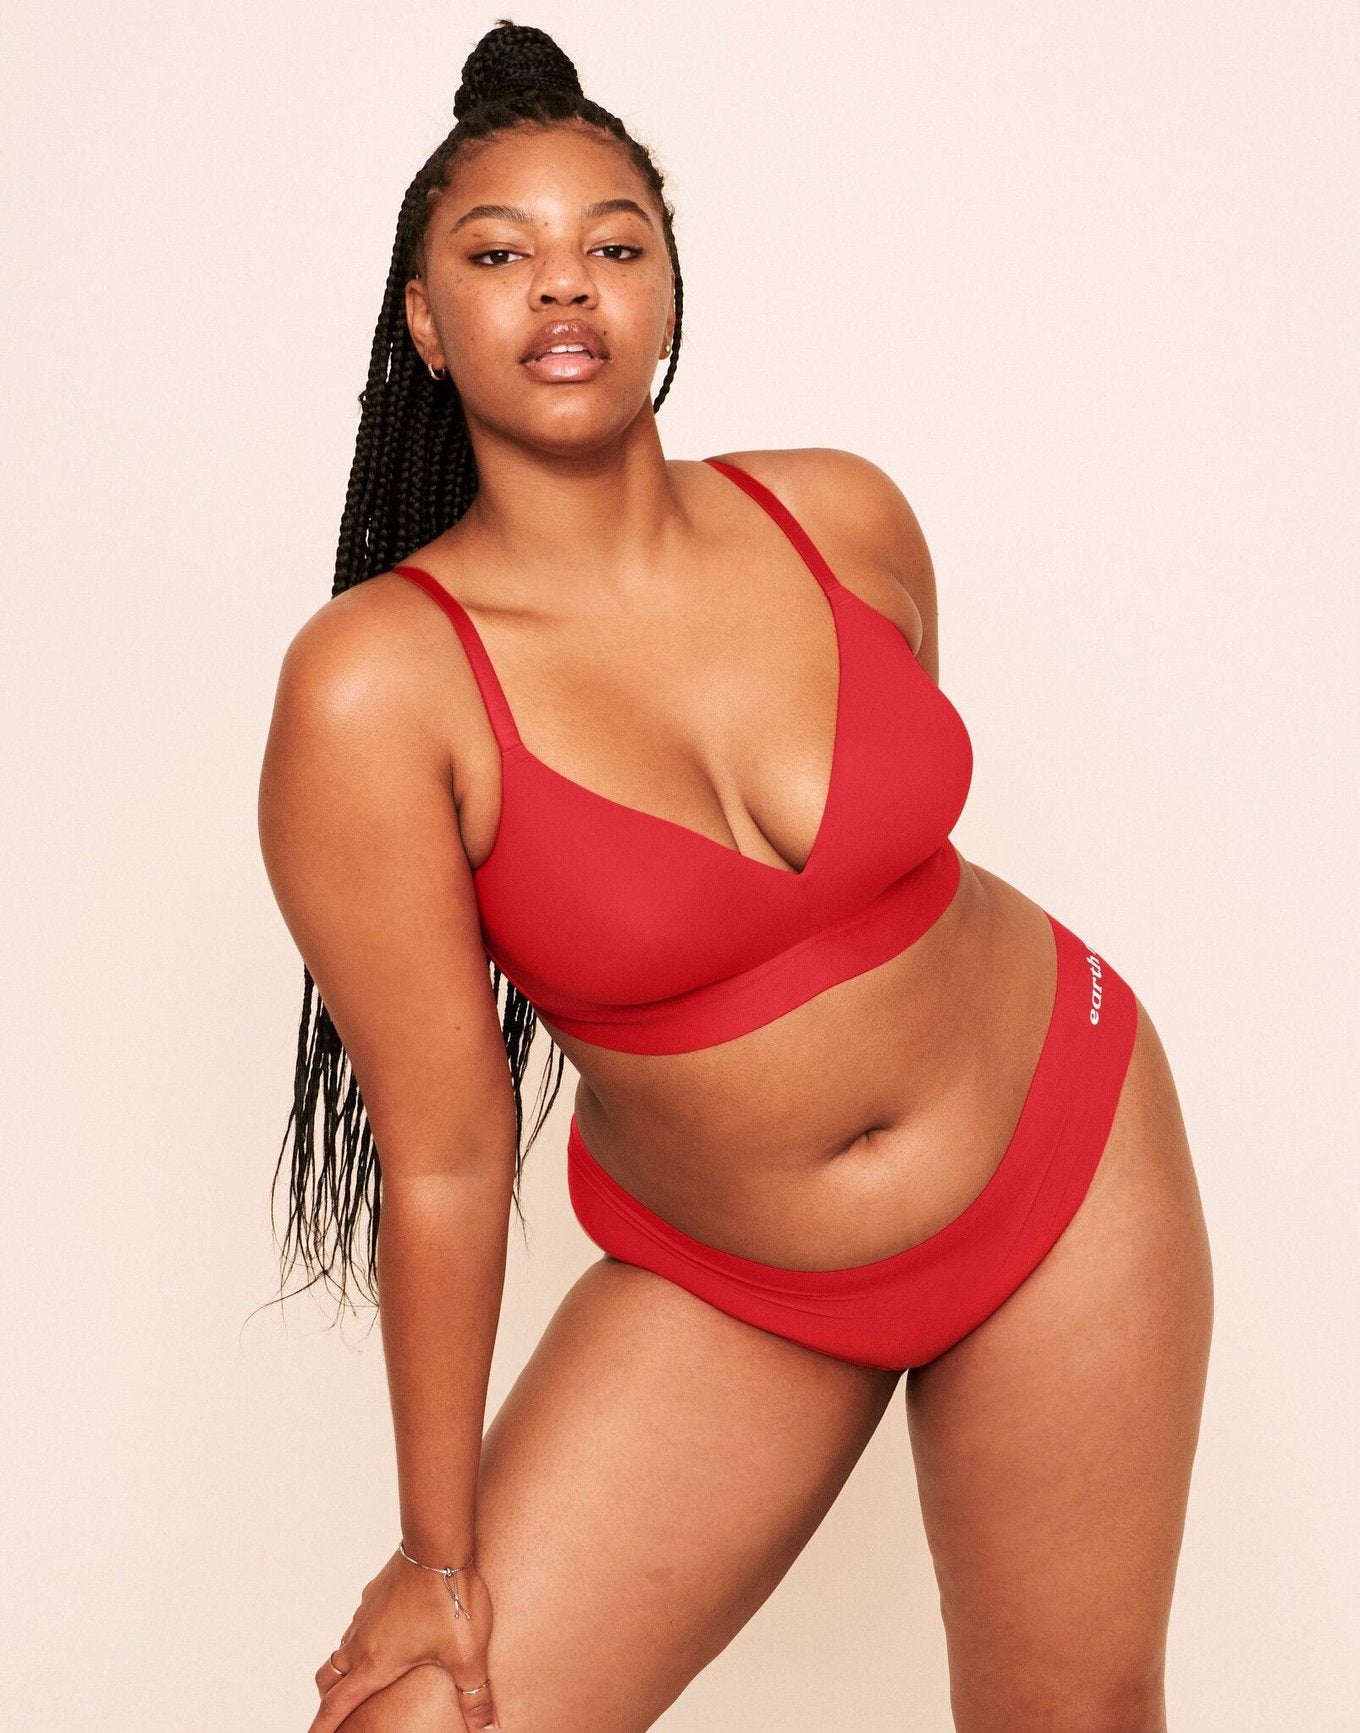 Earth Republic Makenna Lightly Lined Wireless Bra Wireless Bra in color Flame Scarlet and shape plunge